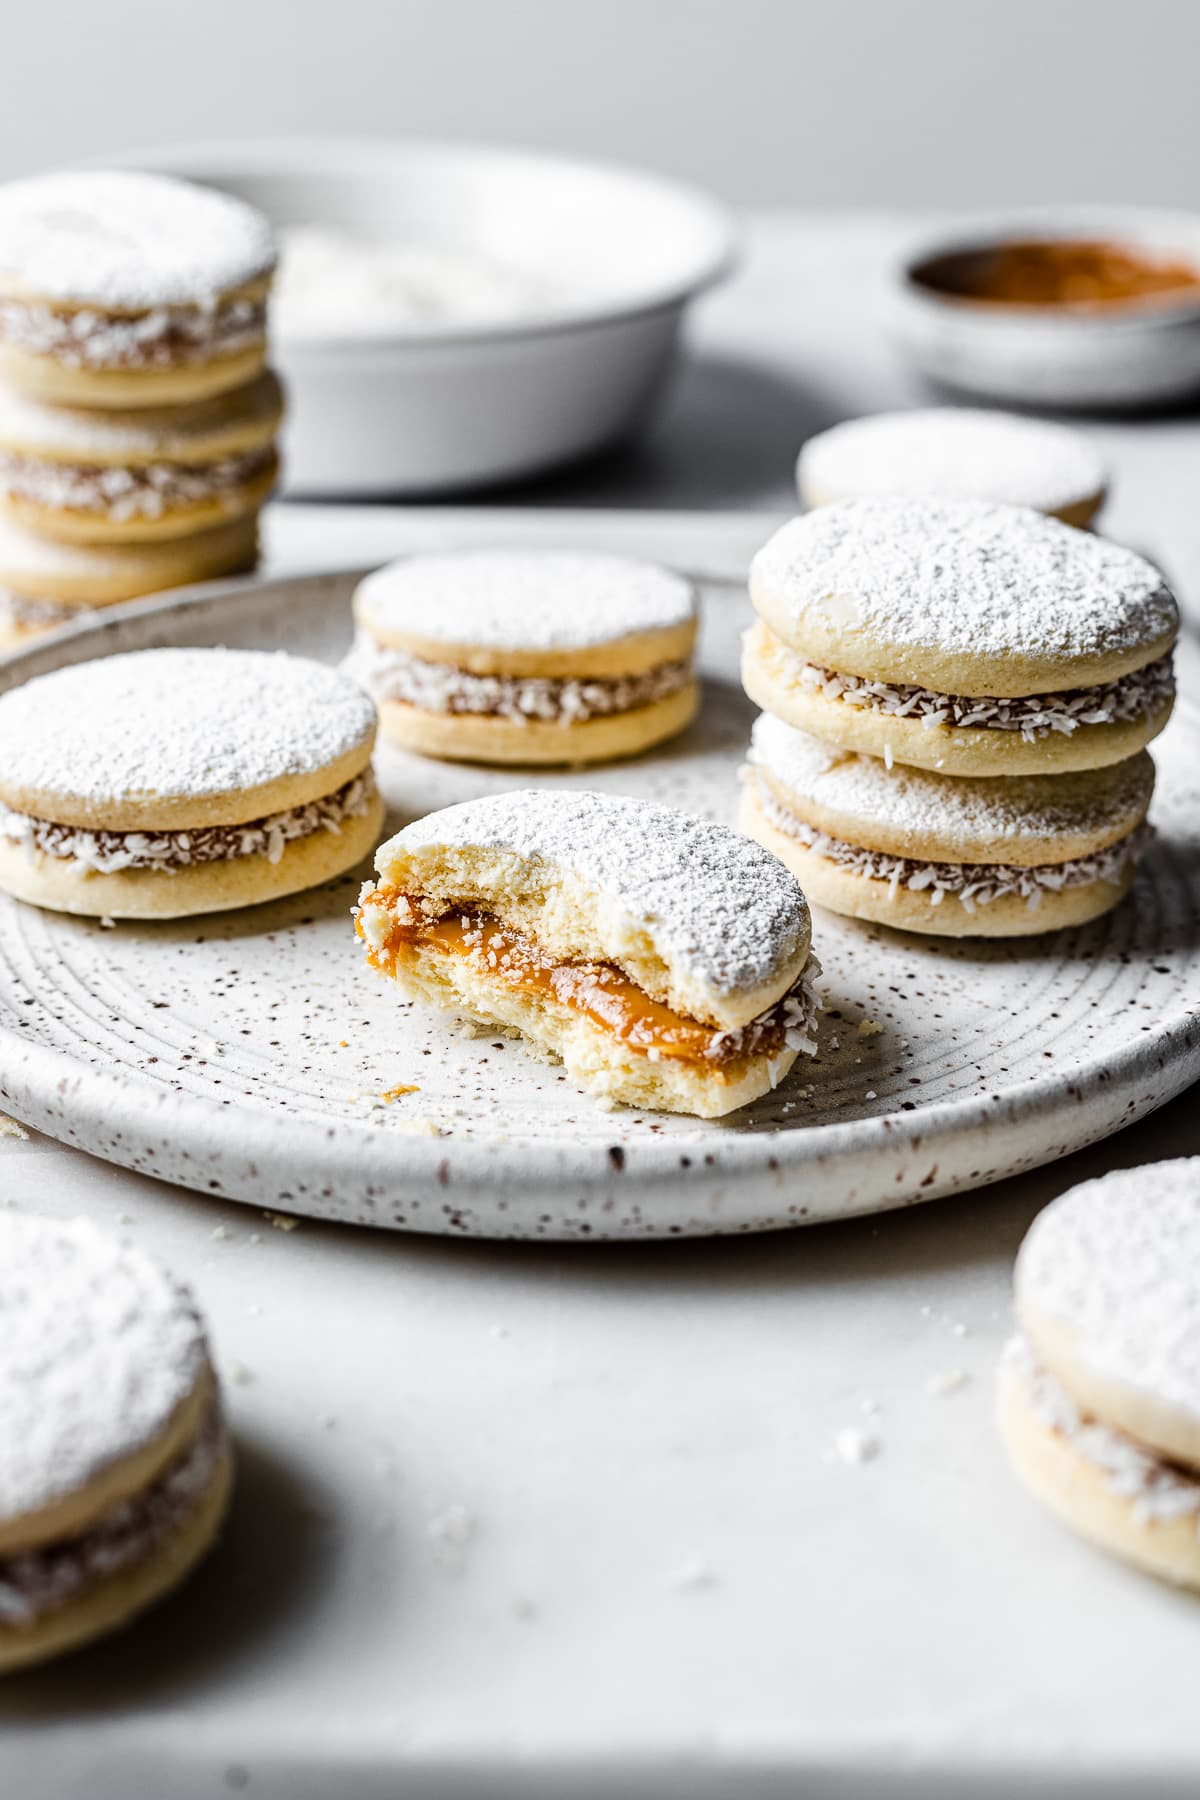 A light and airy image of alfajores de maicena on a white speckled ceramic plate. One cookie is partially eaten, showing the dulce de leche inside. More cookies are nearby, with a bowls of powdered sugar and dulce de leche in the background.